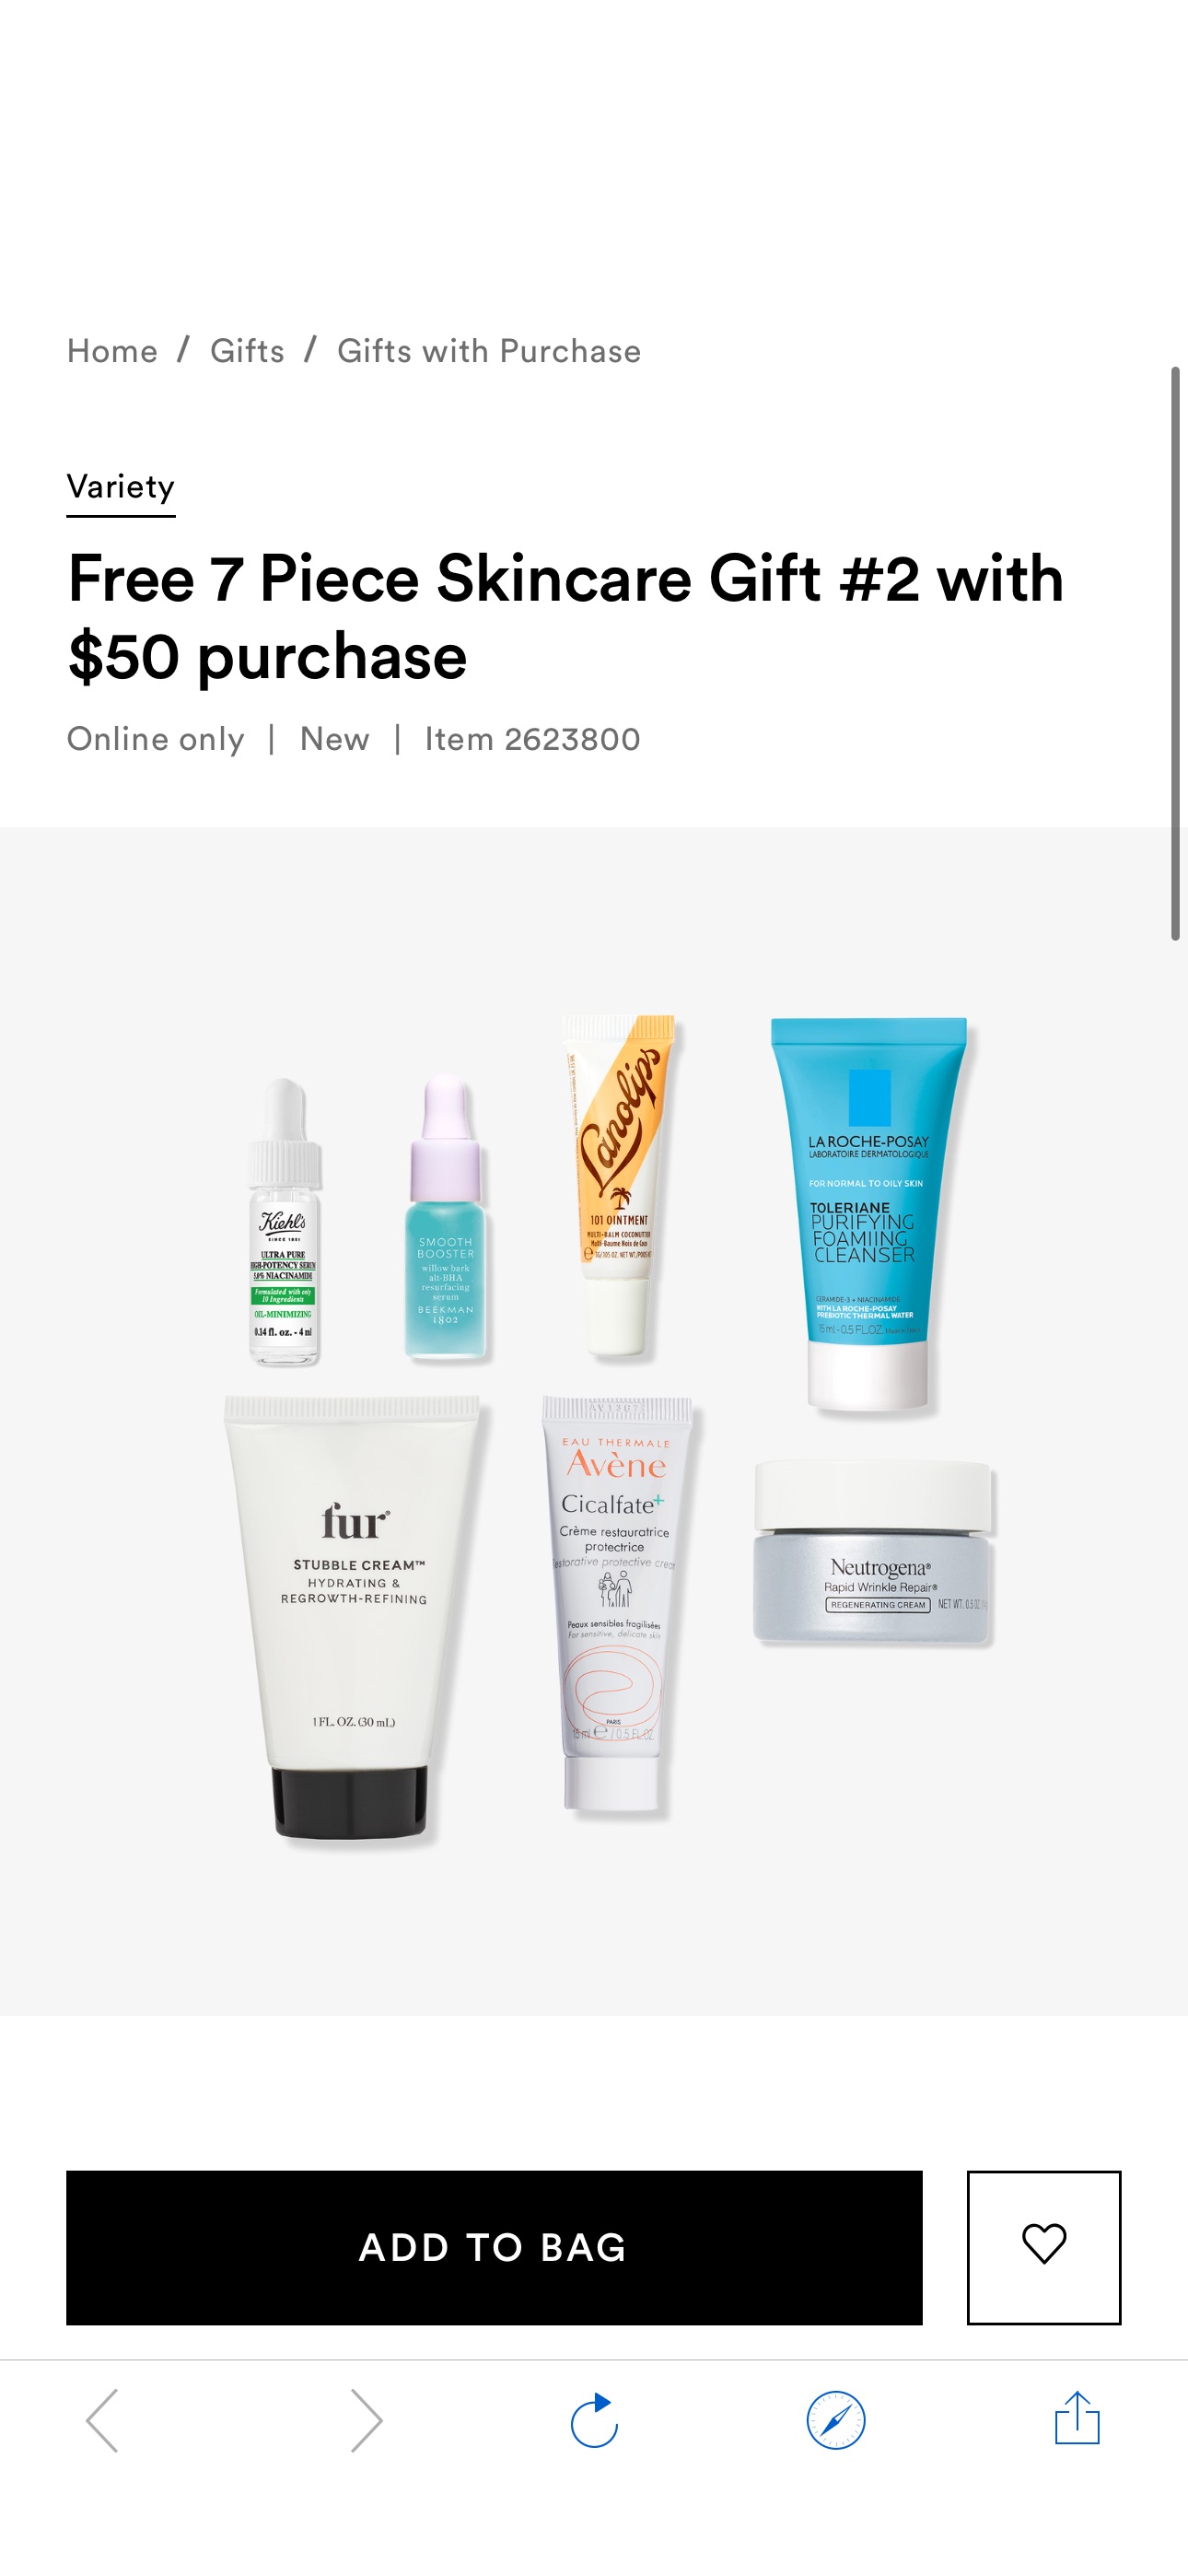 Free 7 Piece Skincare Gift #2 with $50 purchase - Variety | Ulta Beauty